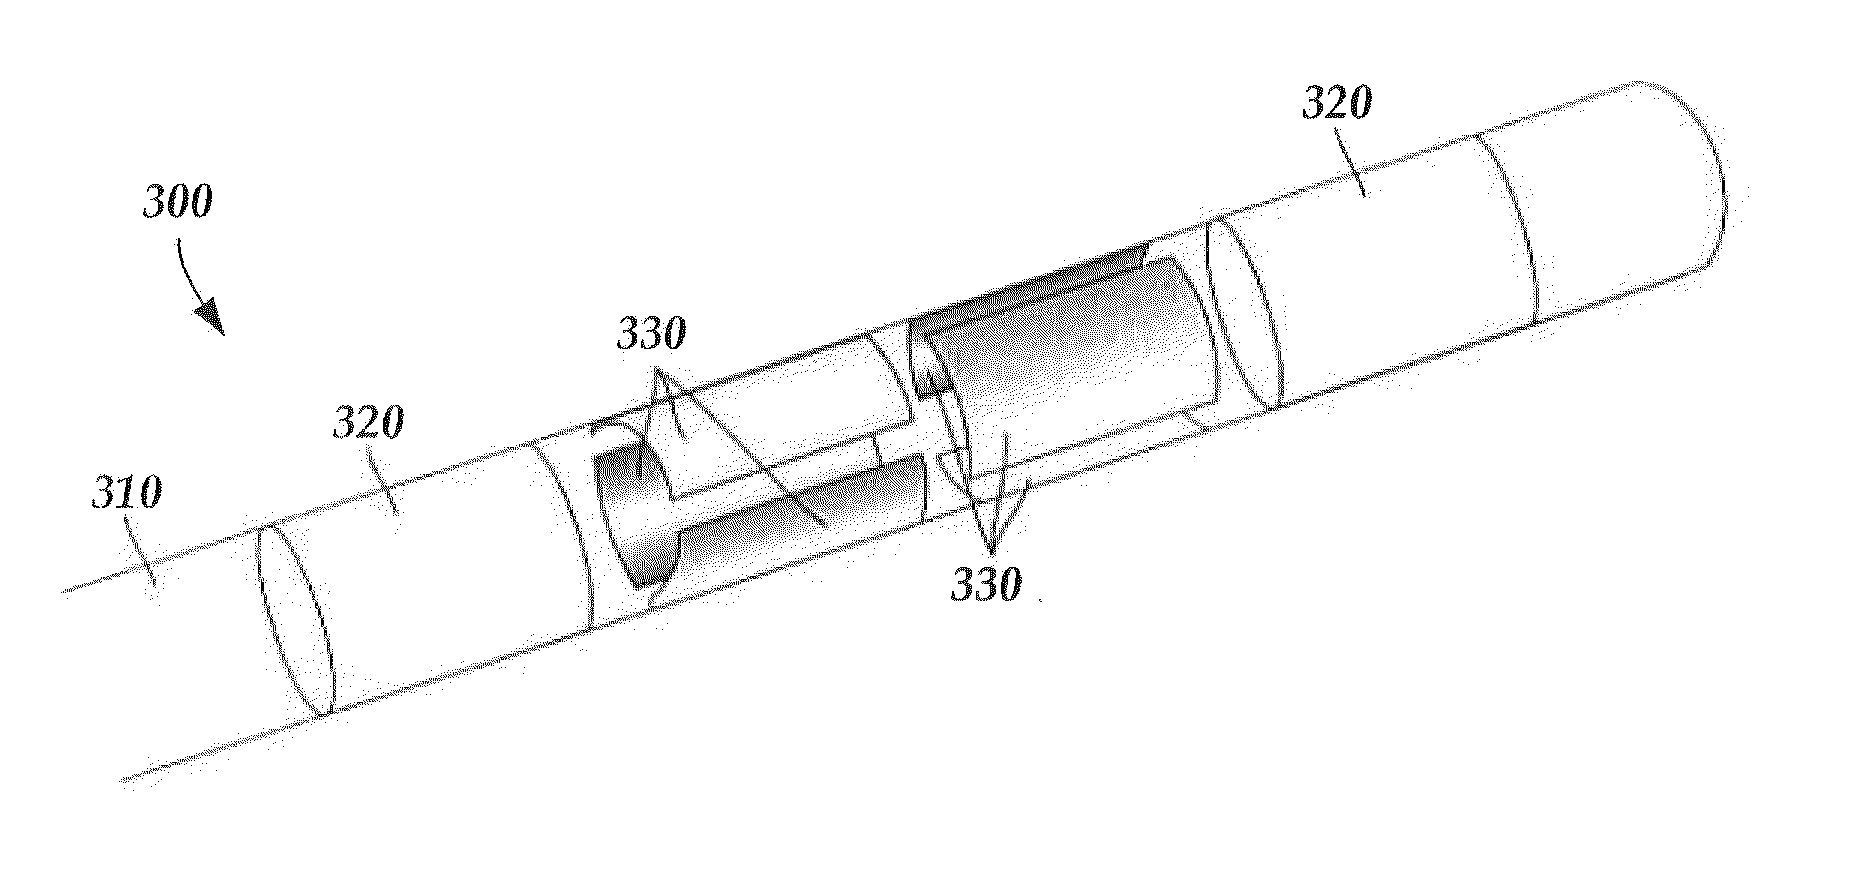 Segmented electrode leads formed from pre-electrodes with depressions or apertures and methods of making and using